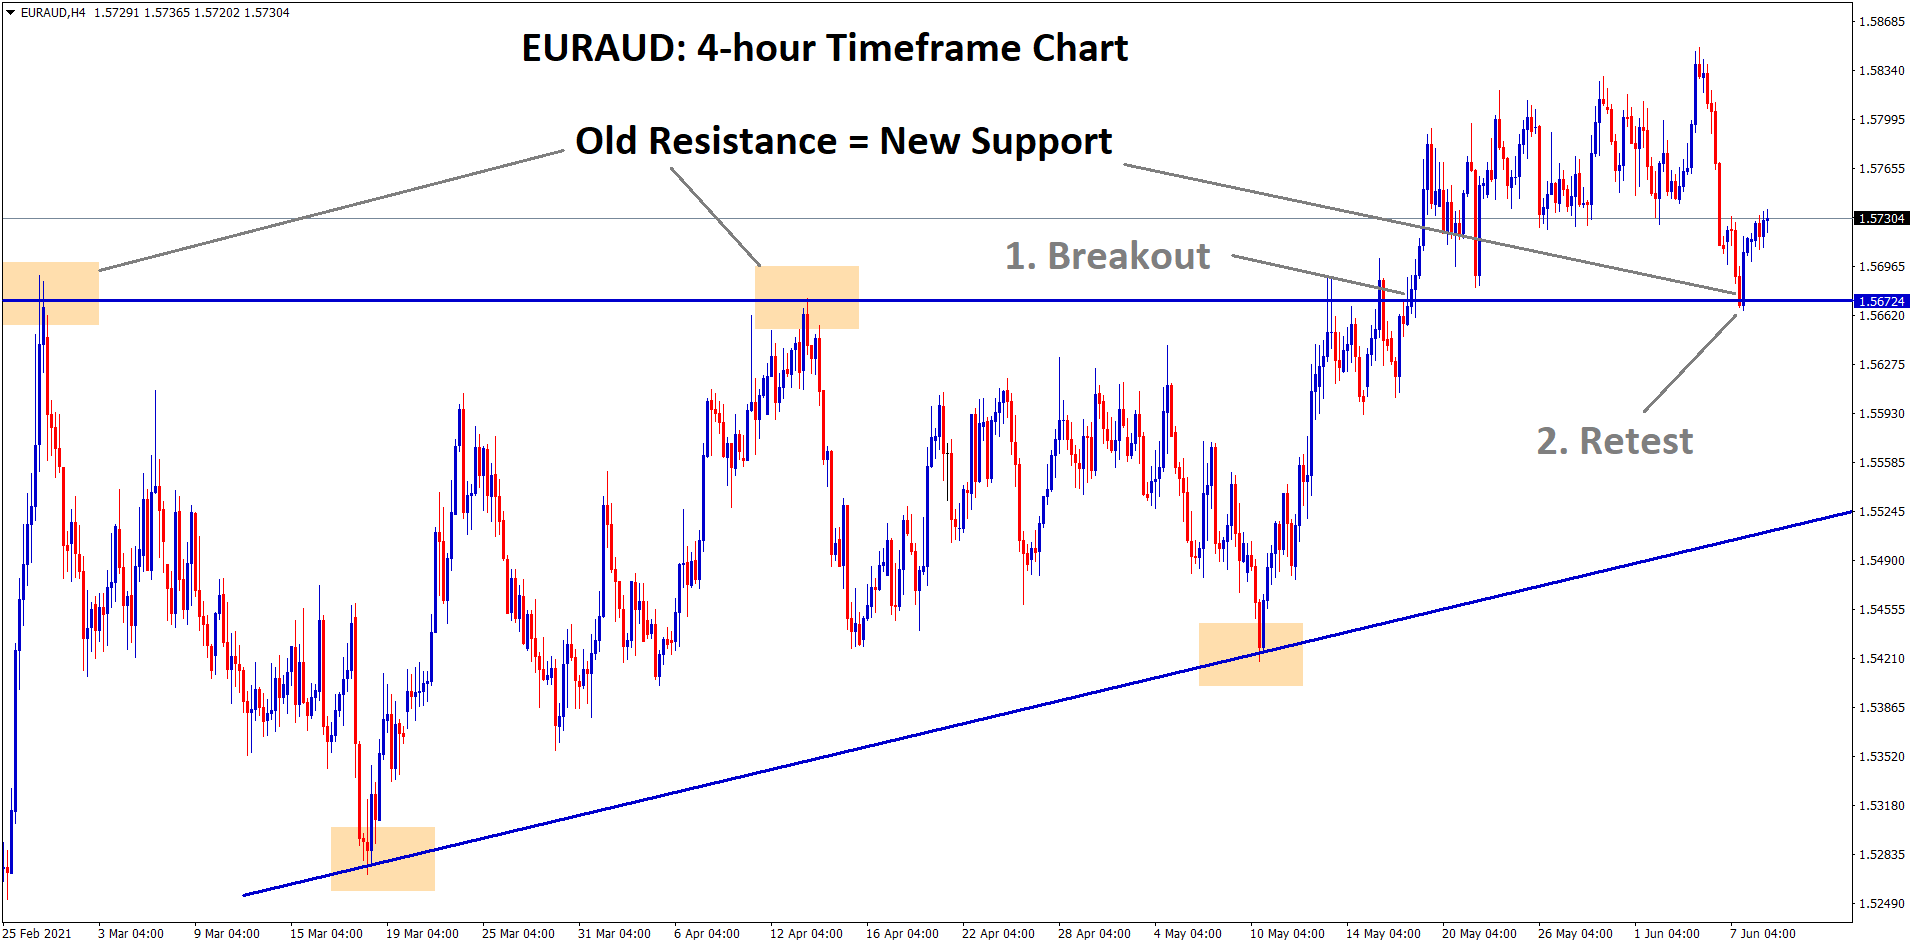 EUR AUD old resistance becomes new support and Ascending Triangle breakout retest going on.